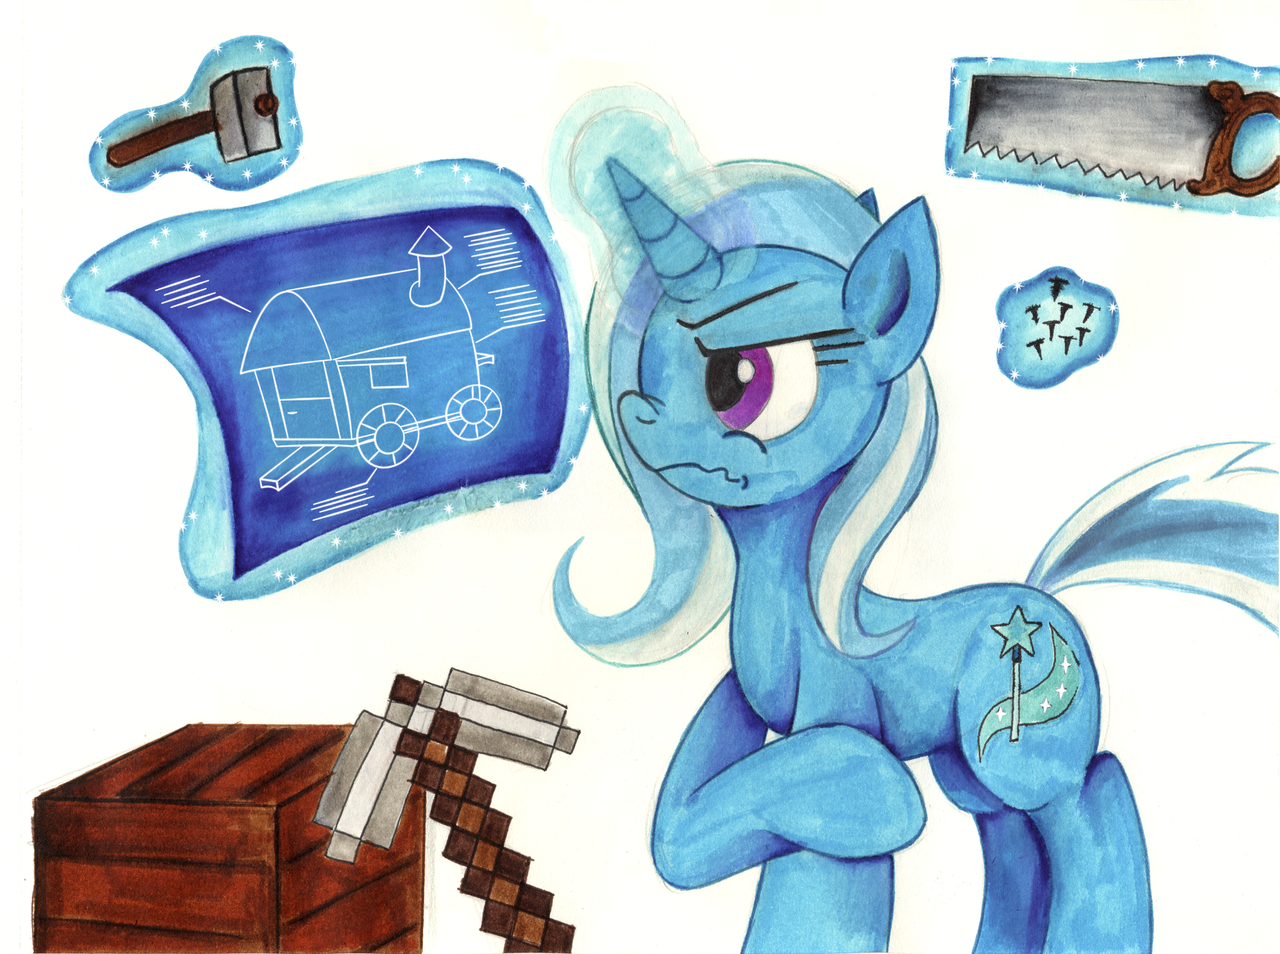 Trixie - Great and Powerful Builder - My little pony, Trixie, Jamescorck